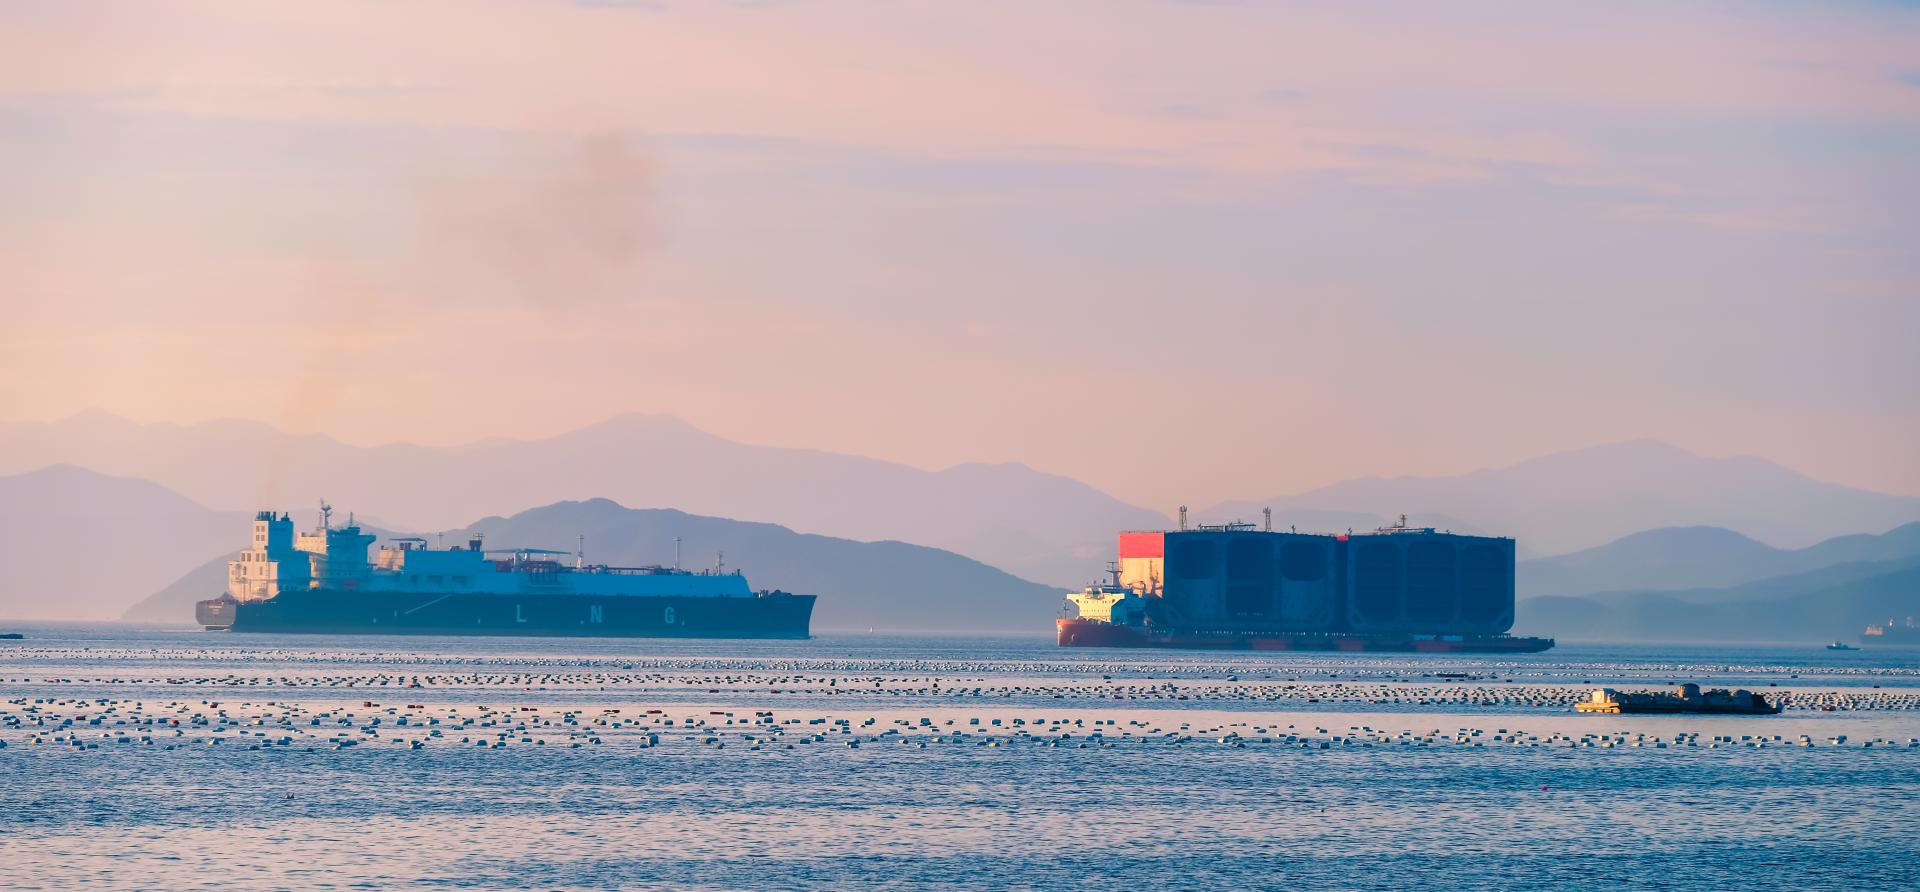 Three reasons the U.S. LNG pause does not threaten South Korea’s energy security and transition